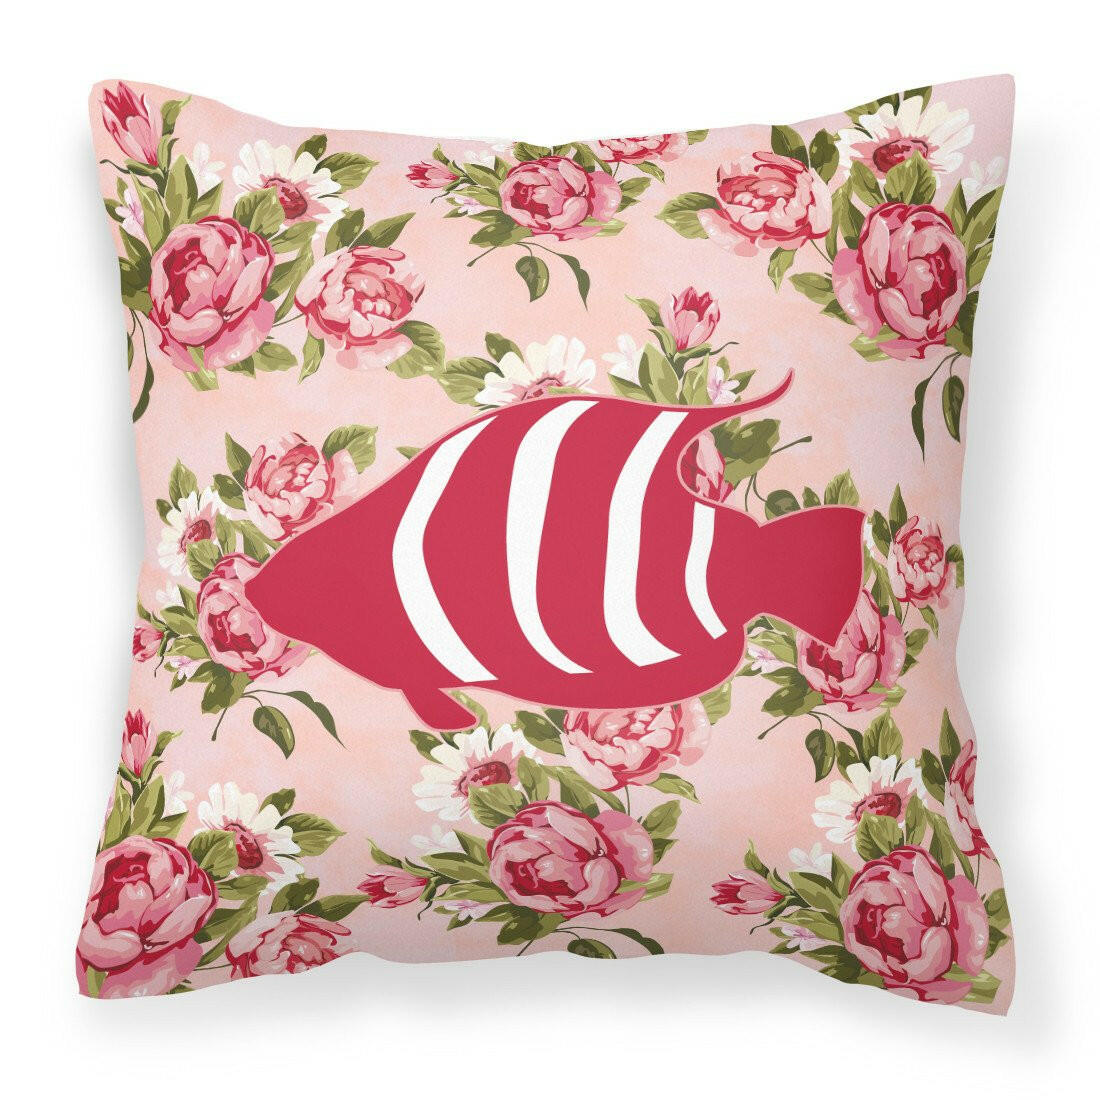 Fish Shabby Chic Pink Roses  Fabric Decorative Pillow BB1020-RS-PK-PW1414 - the-store.com